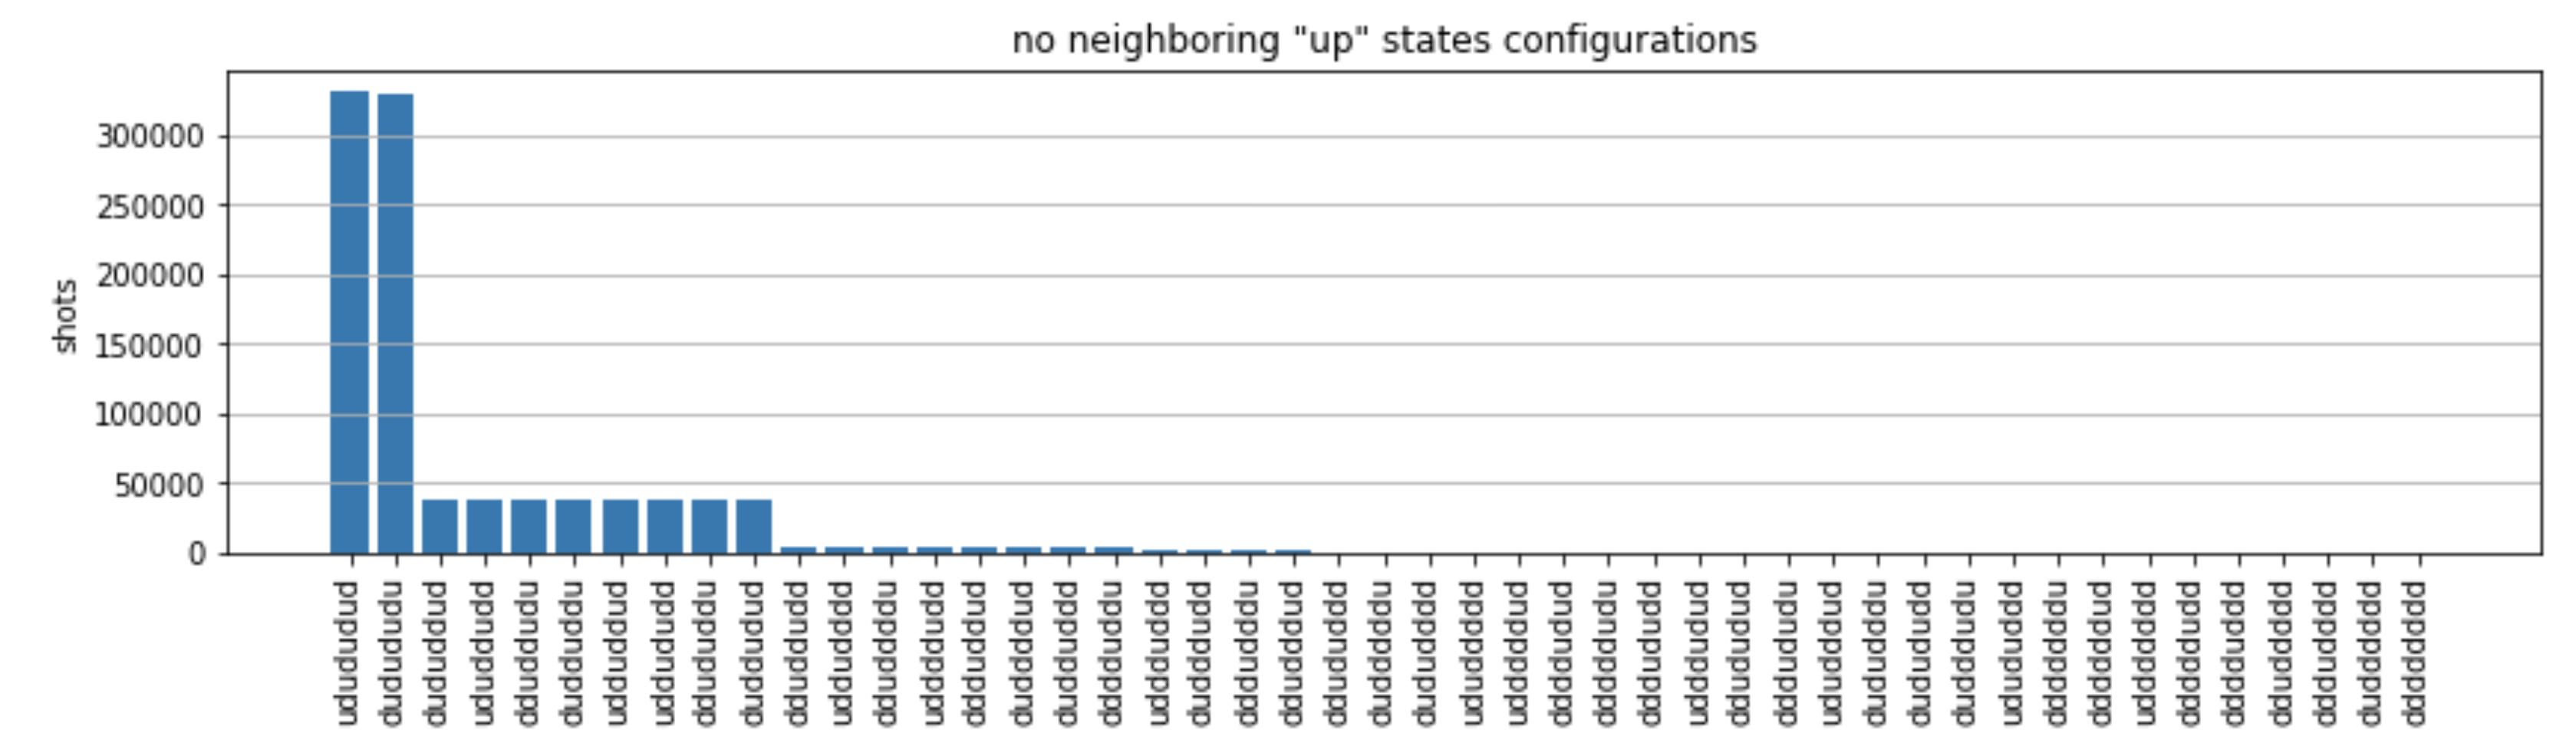 Bar chart showing a large number of shots with no neighboring "up" states configurations.